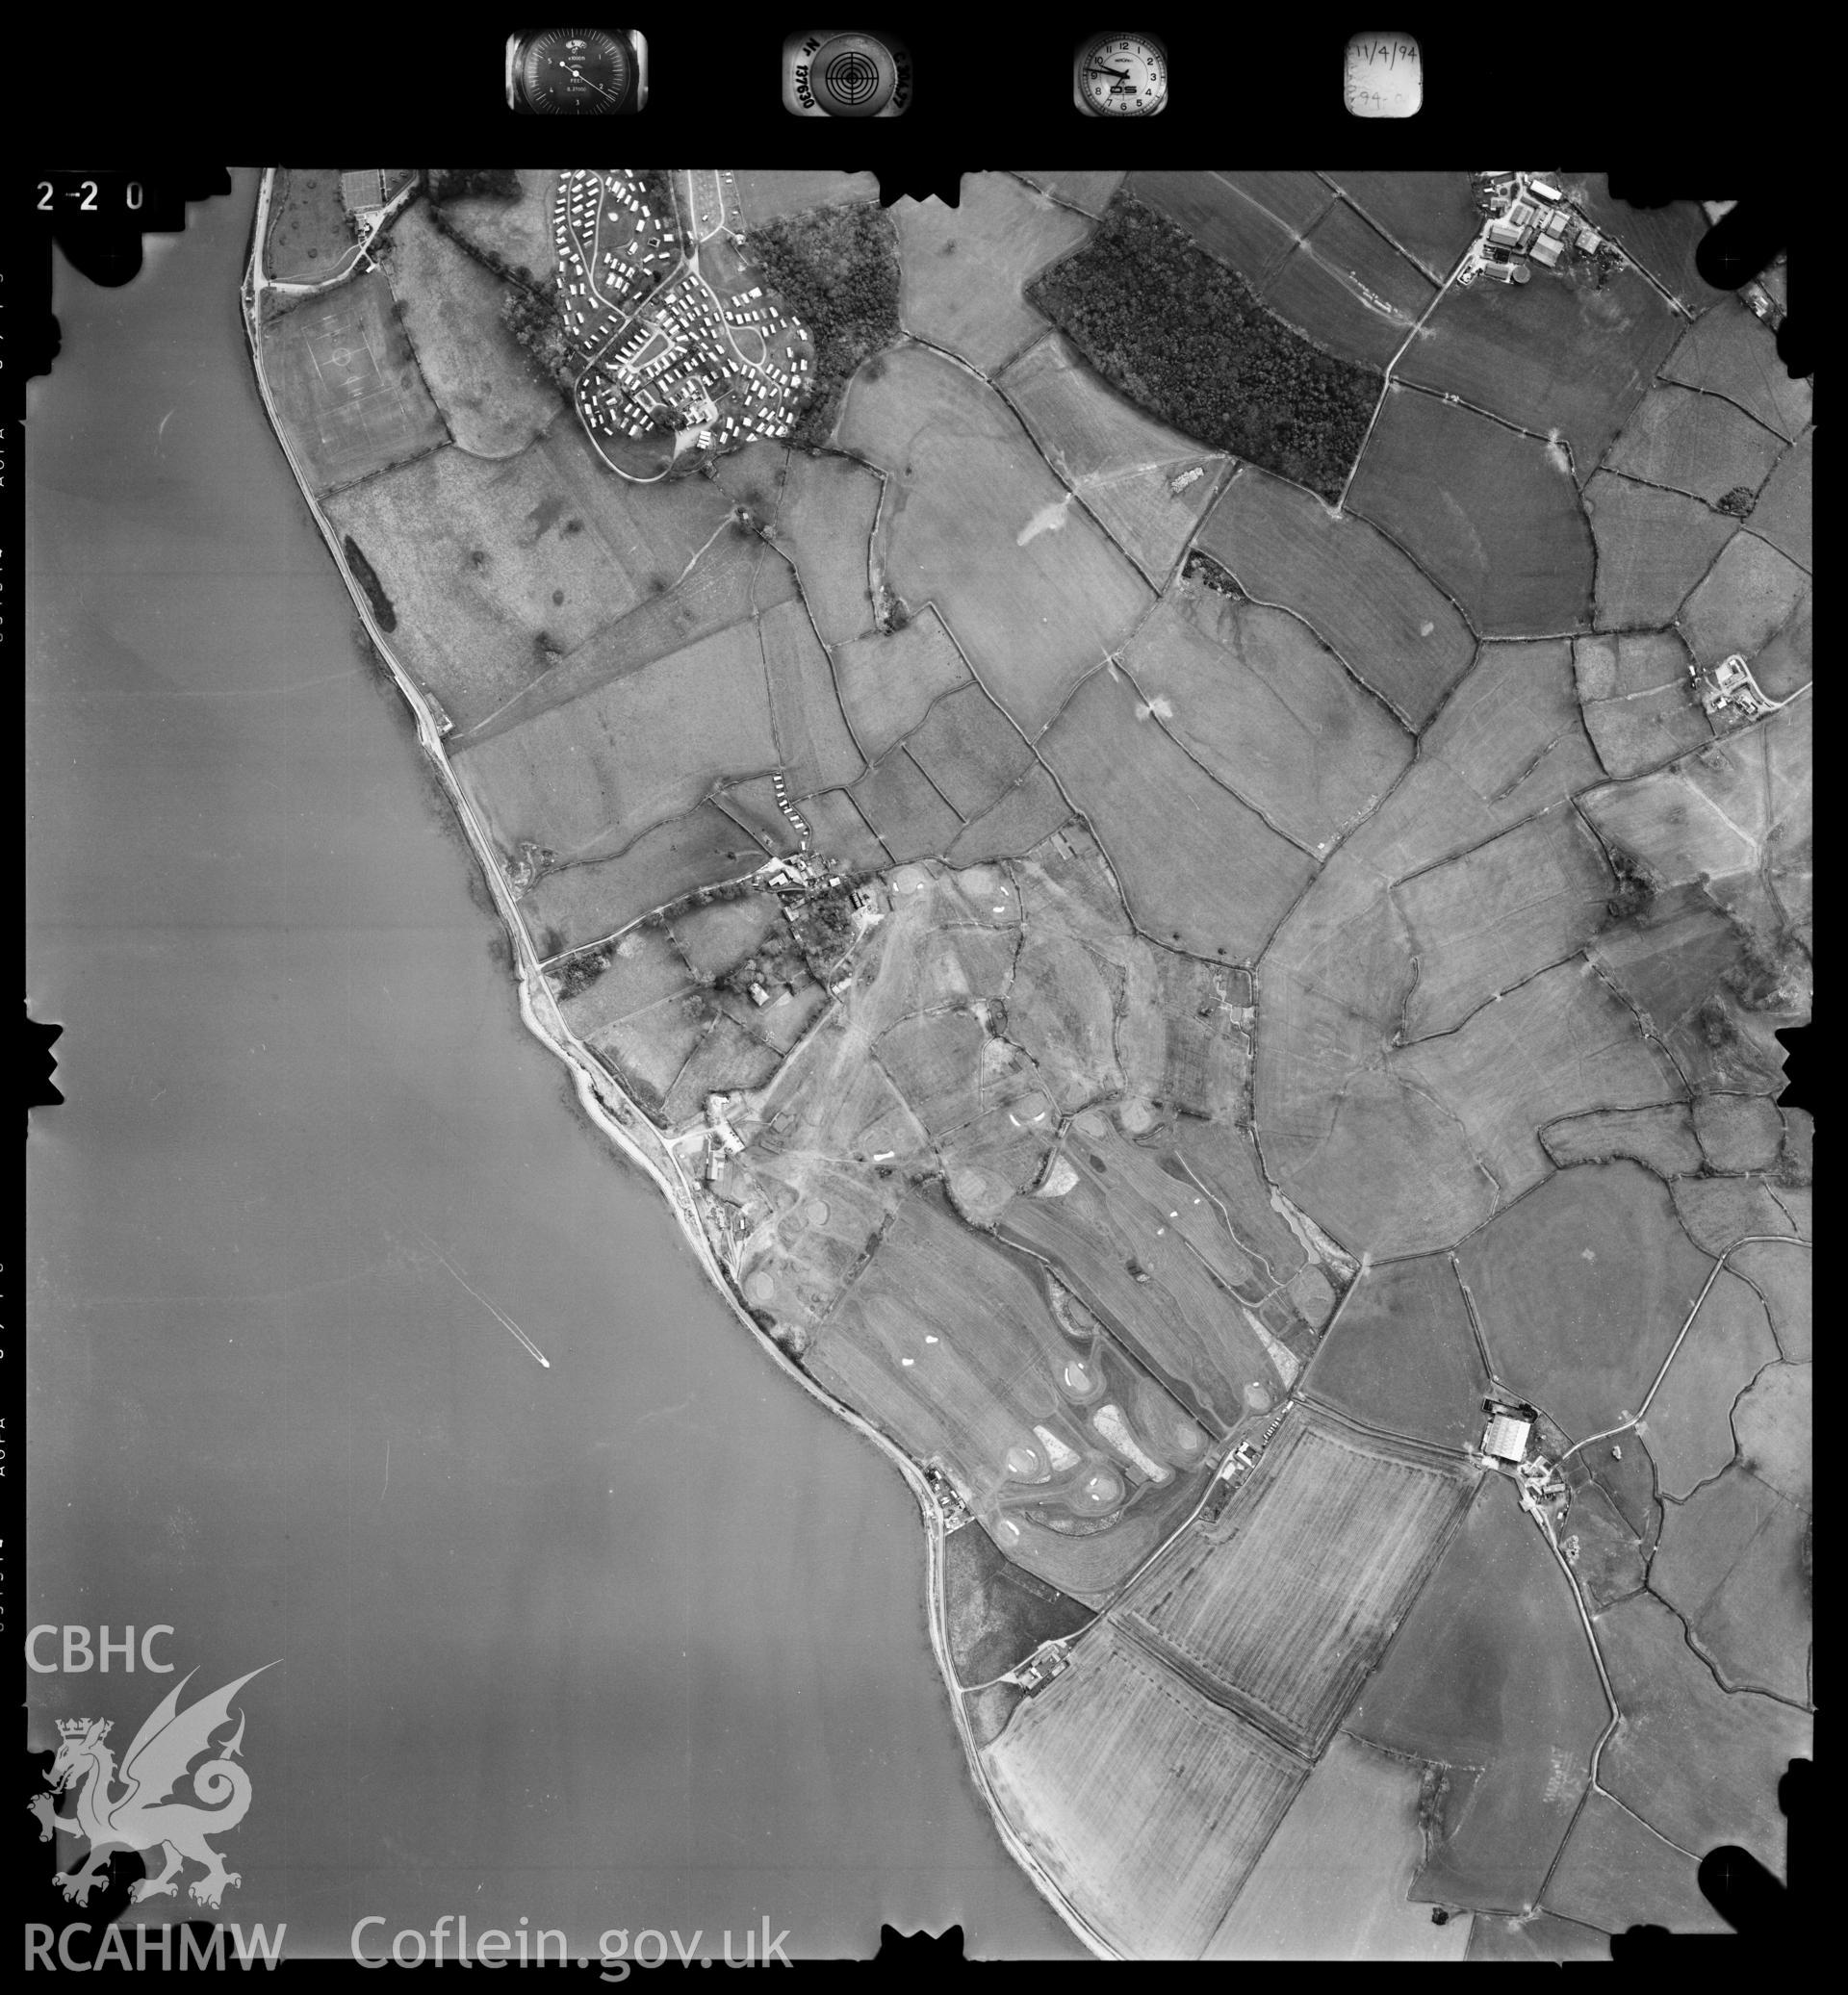 Digitized copy of an aerial photograph showing the Menai Straits area, taken by Ordnance Survey, 1994.